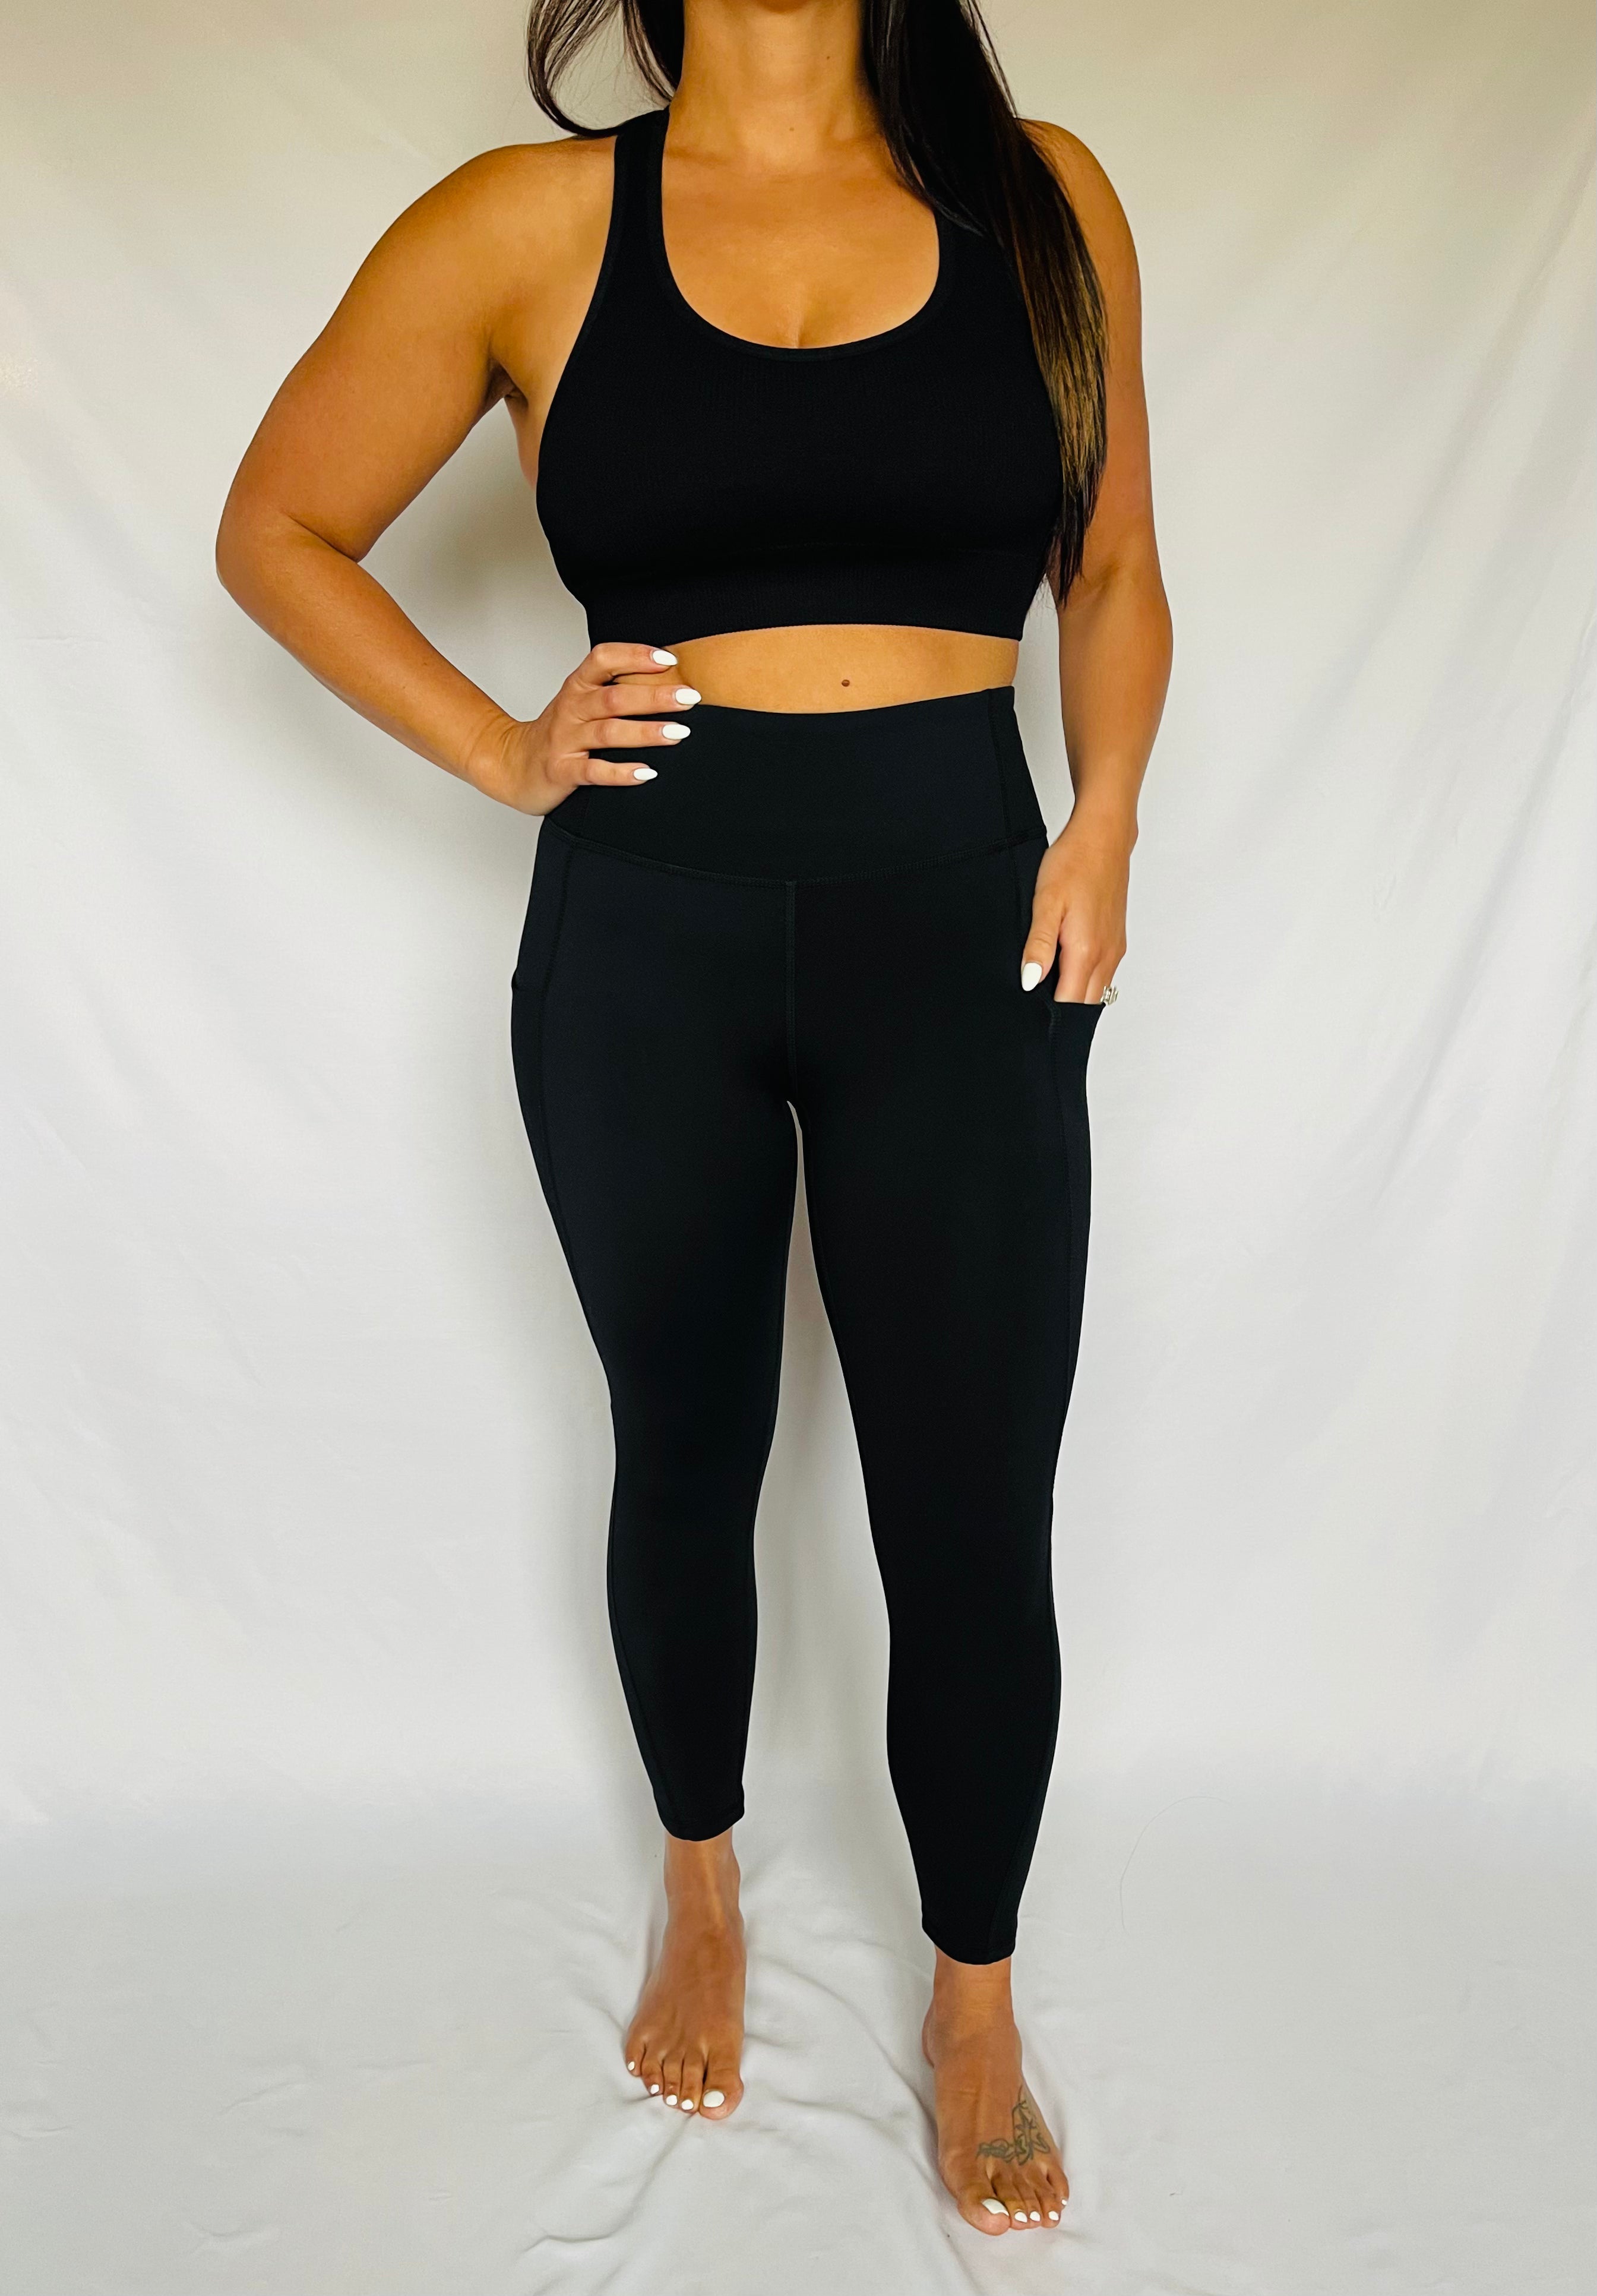 Black Roses Buttery Soft Leggings - Loral Boutique